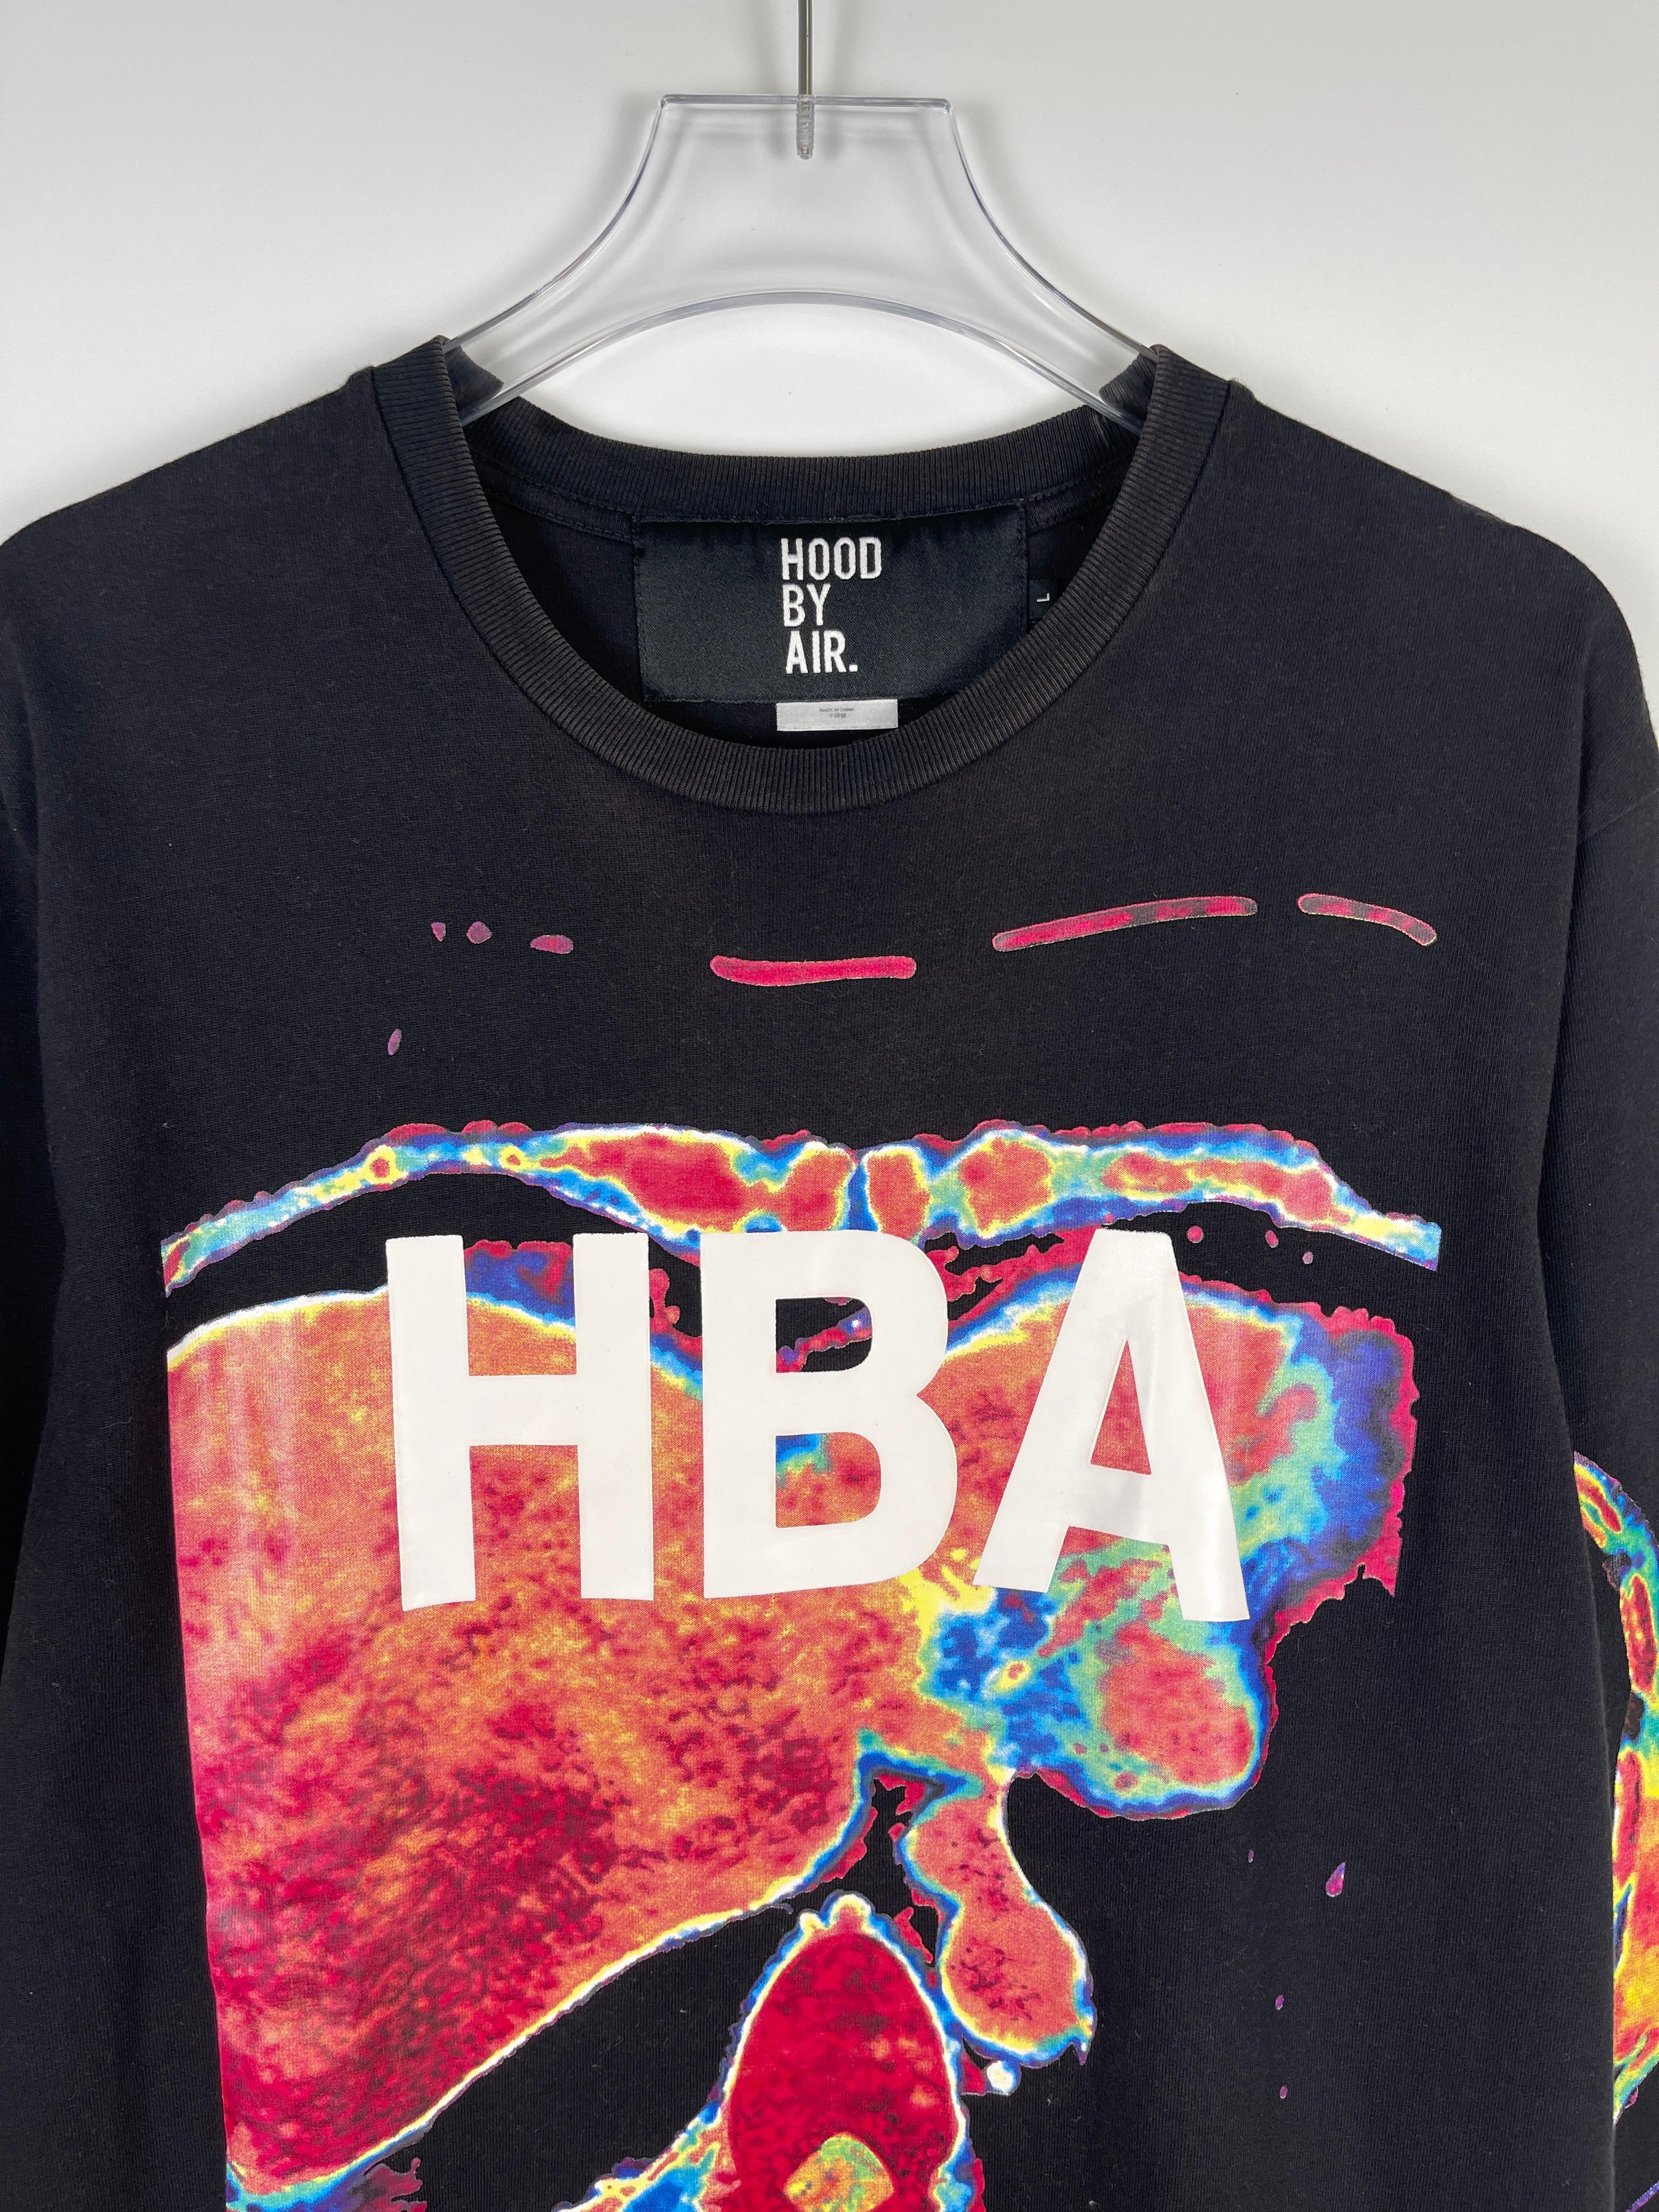 Hood By Air Thermal Vision T-Shirt For Sale 2